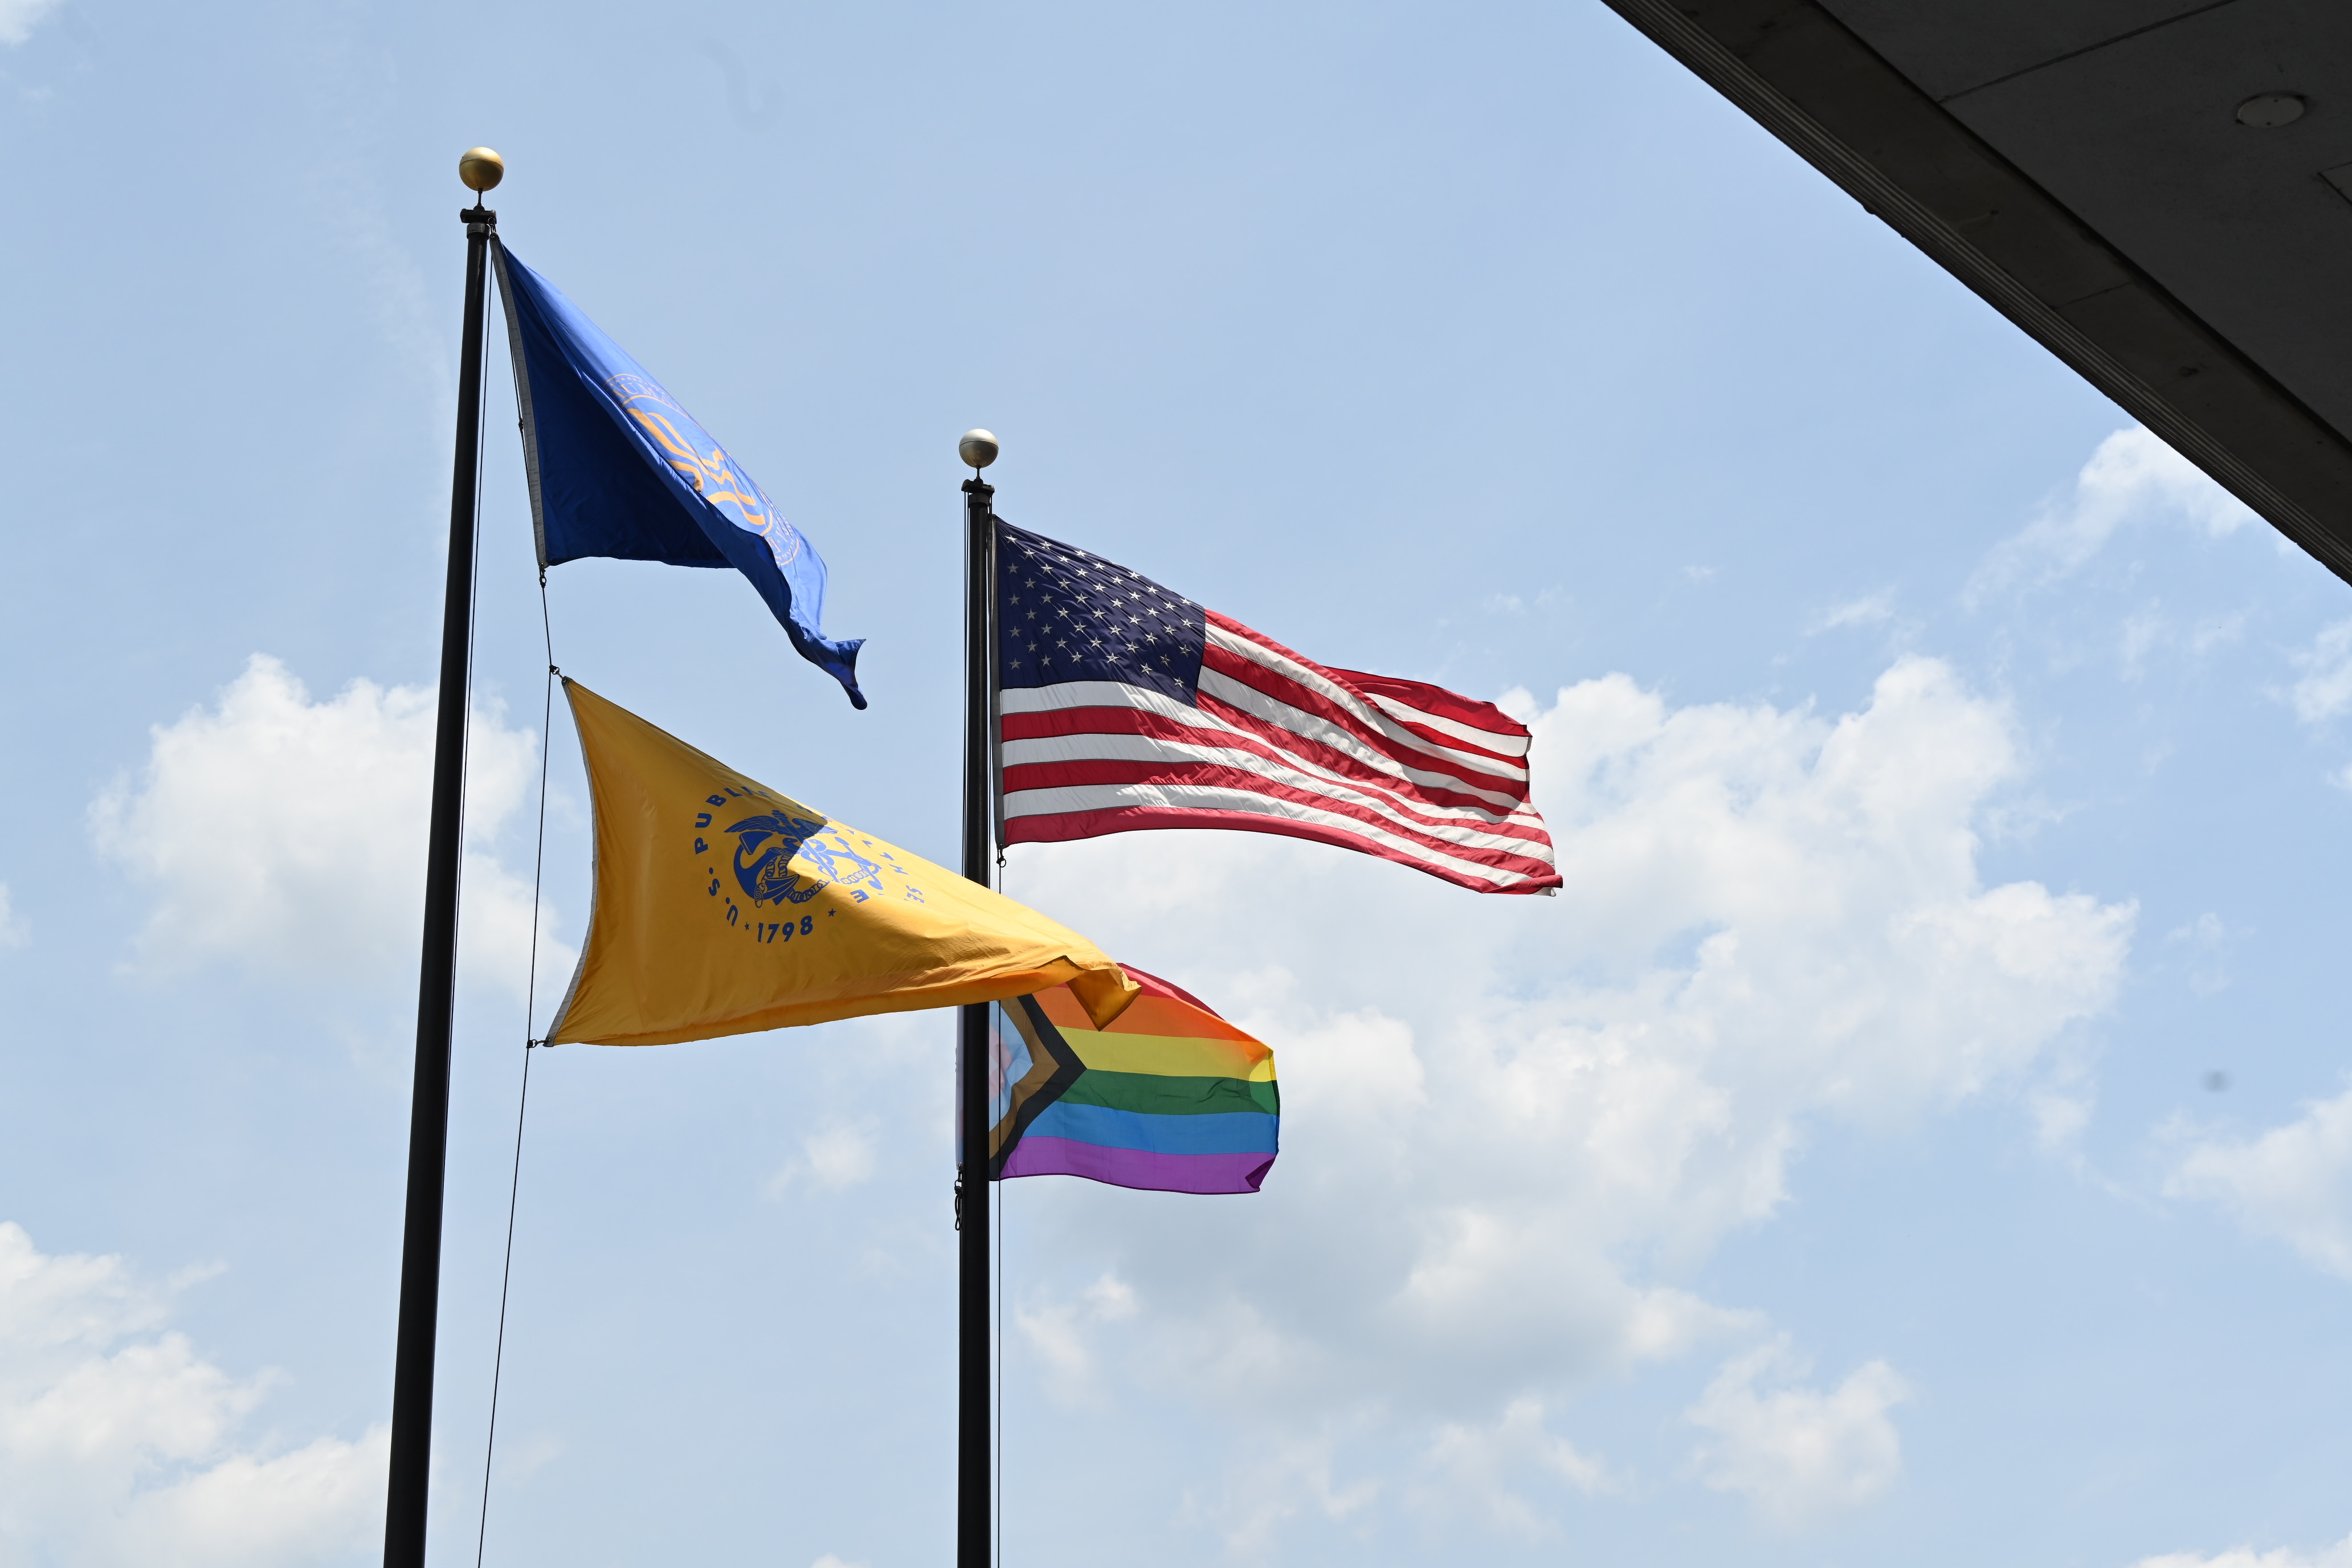 Progress Pride flag, American flag, HHS flag and Public Health Service flag waving in front of a blue sky with large white clouds.